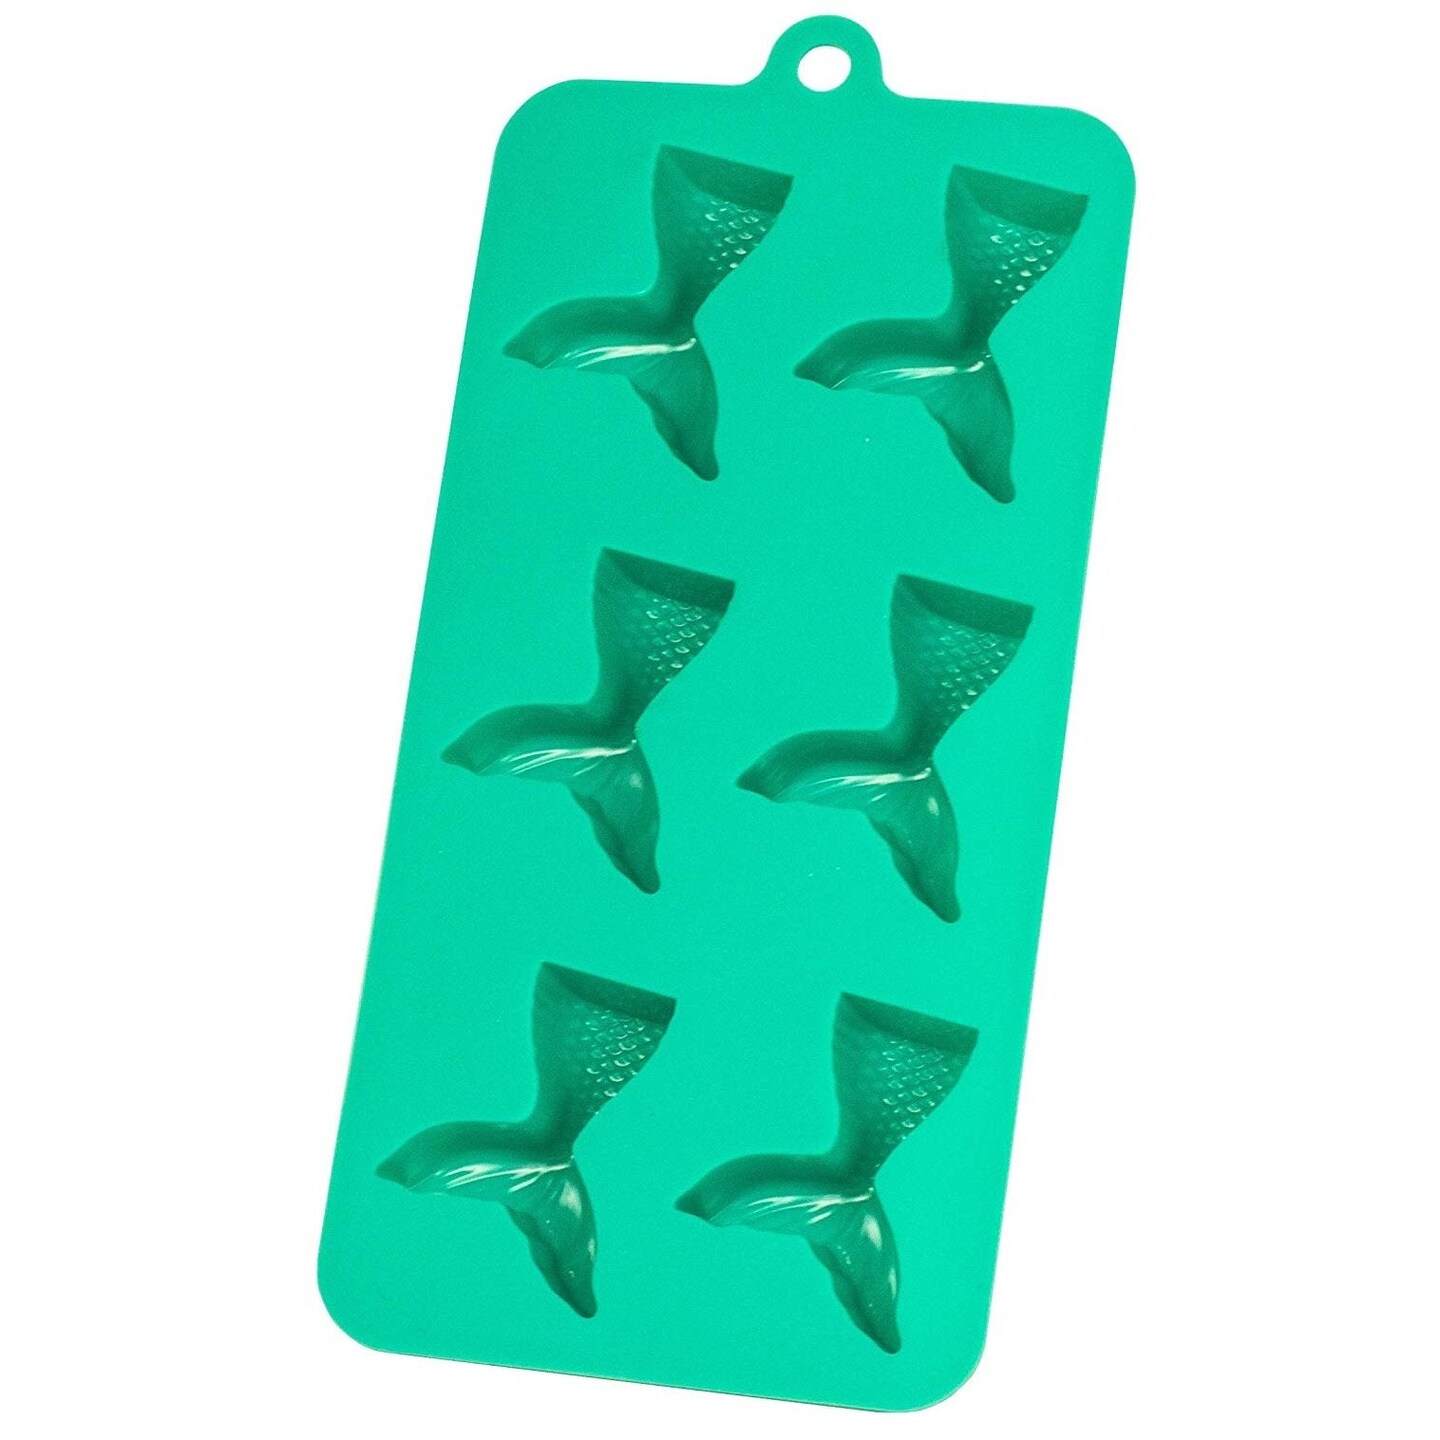 HIC Green Silicone Mermaid Tail Shape Ice Cube Tray and Baking